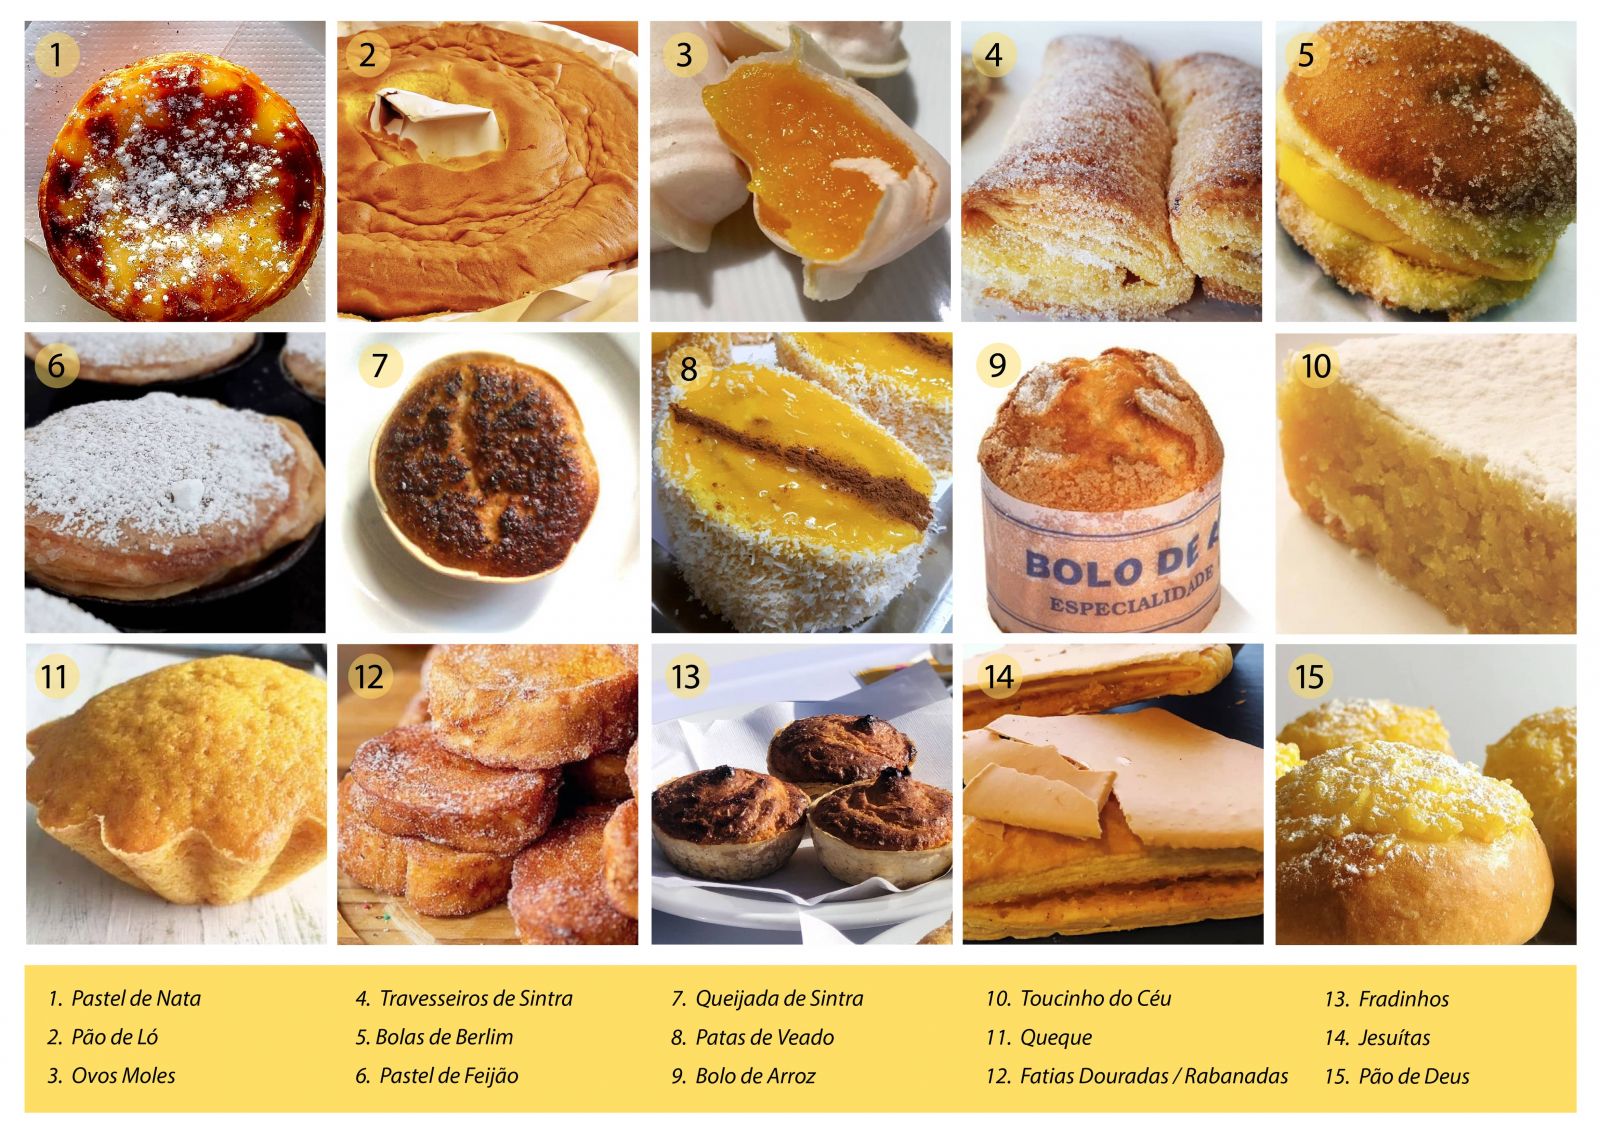 | Delight your taste buds in historic Portuguese Pastries